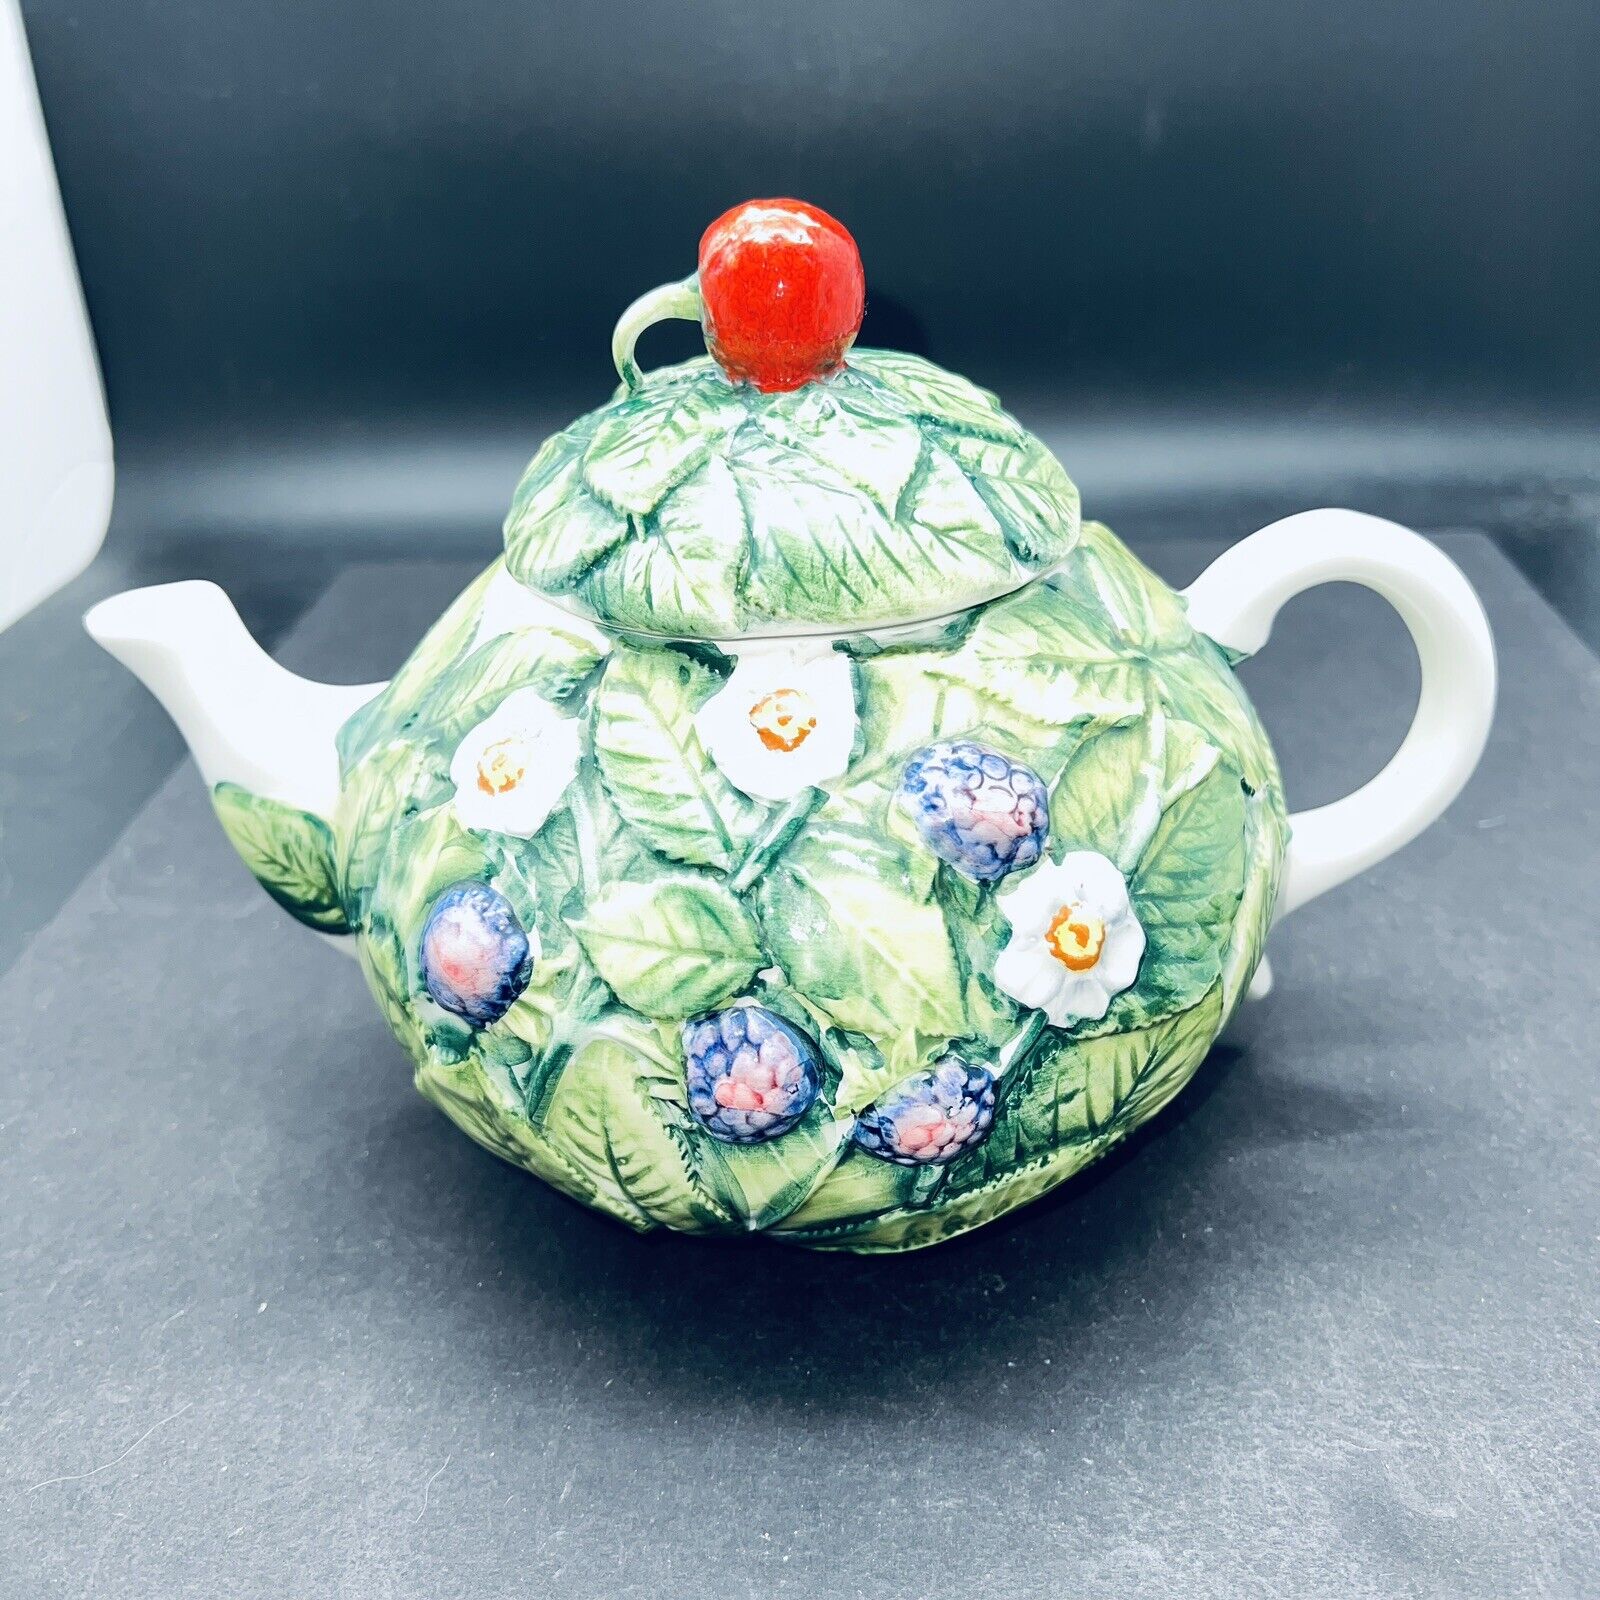 Vintage Made In Italy Green Leaf and Flowers Strawberry Teapot Textured Design